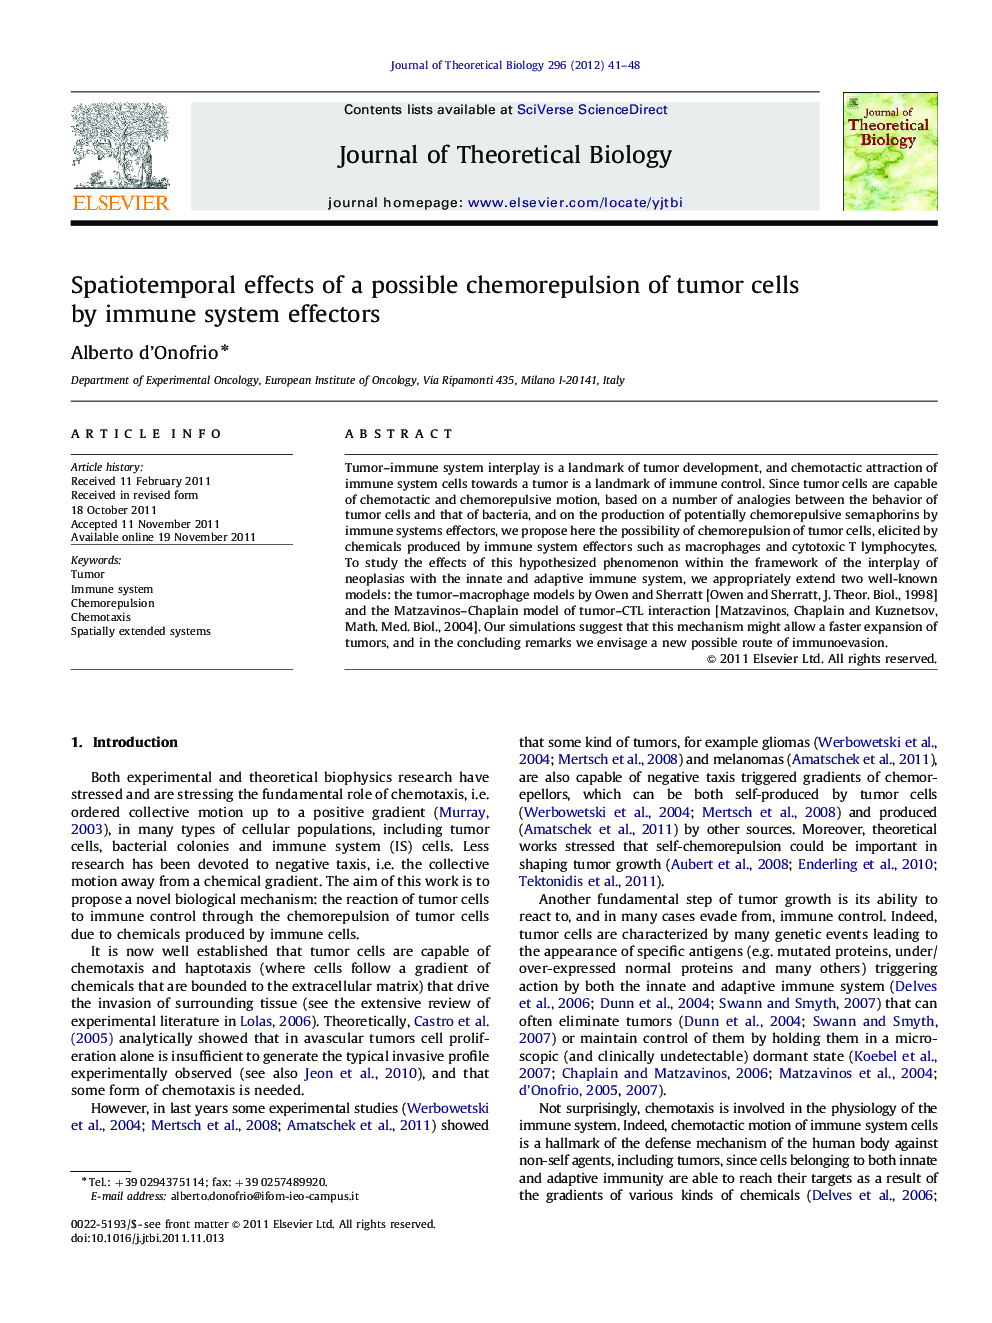 Spatiotemporal effects of a possible chemorepulsion of tumor cells by immune system effectors